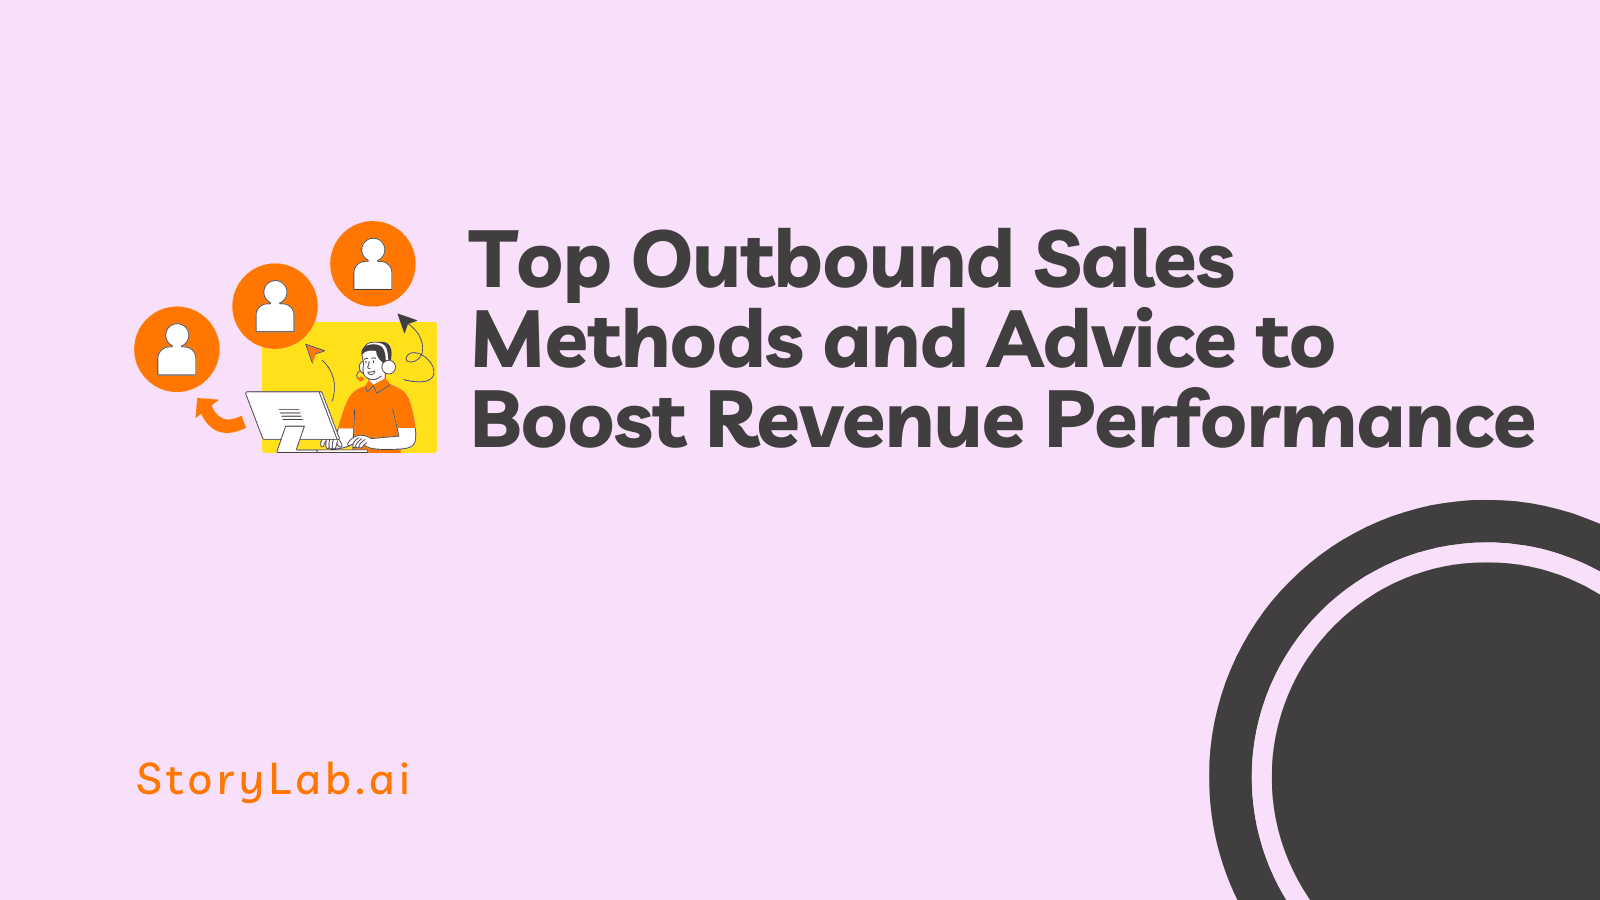 Top Outbound Sales Methods and Advice to Boost Revenue Performance